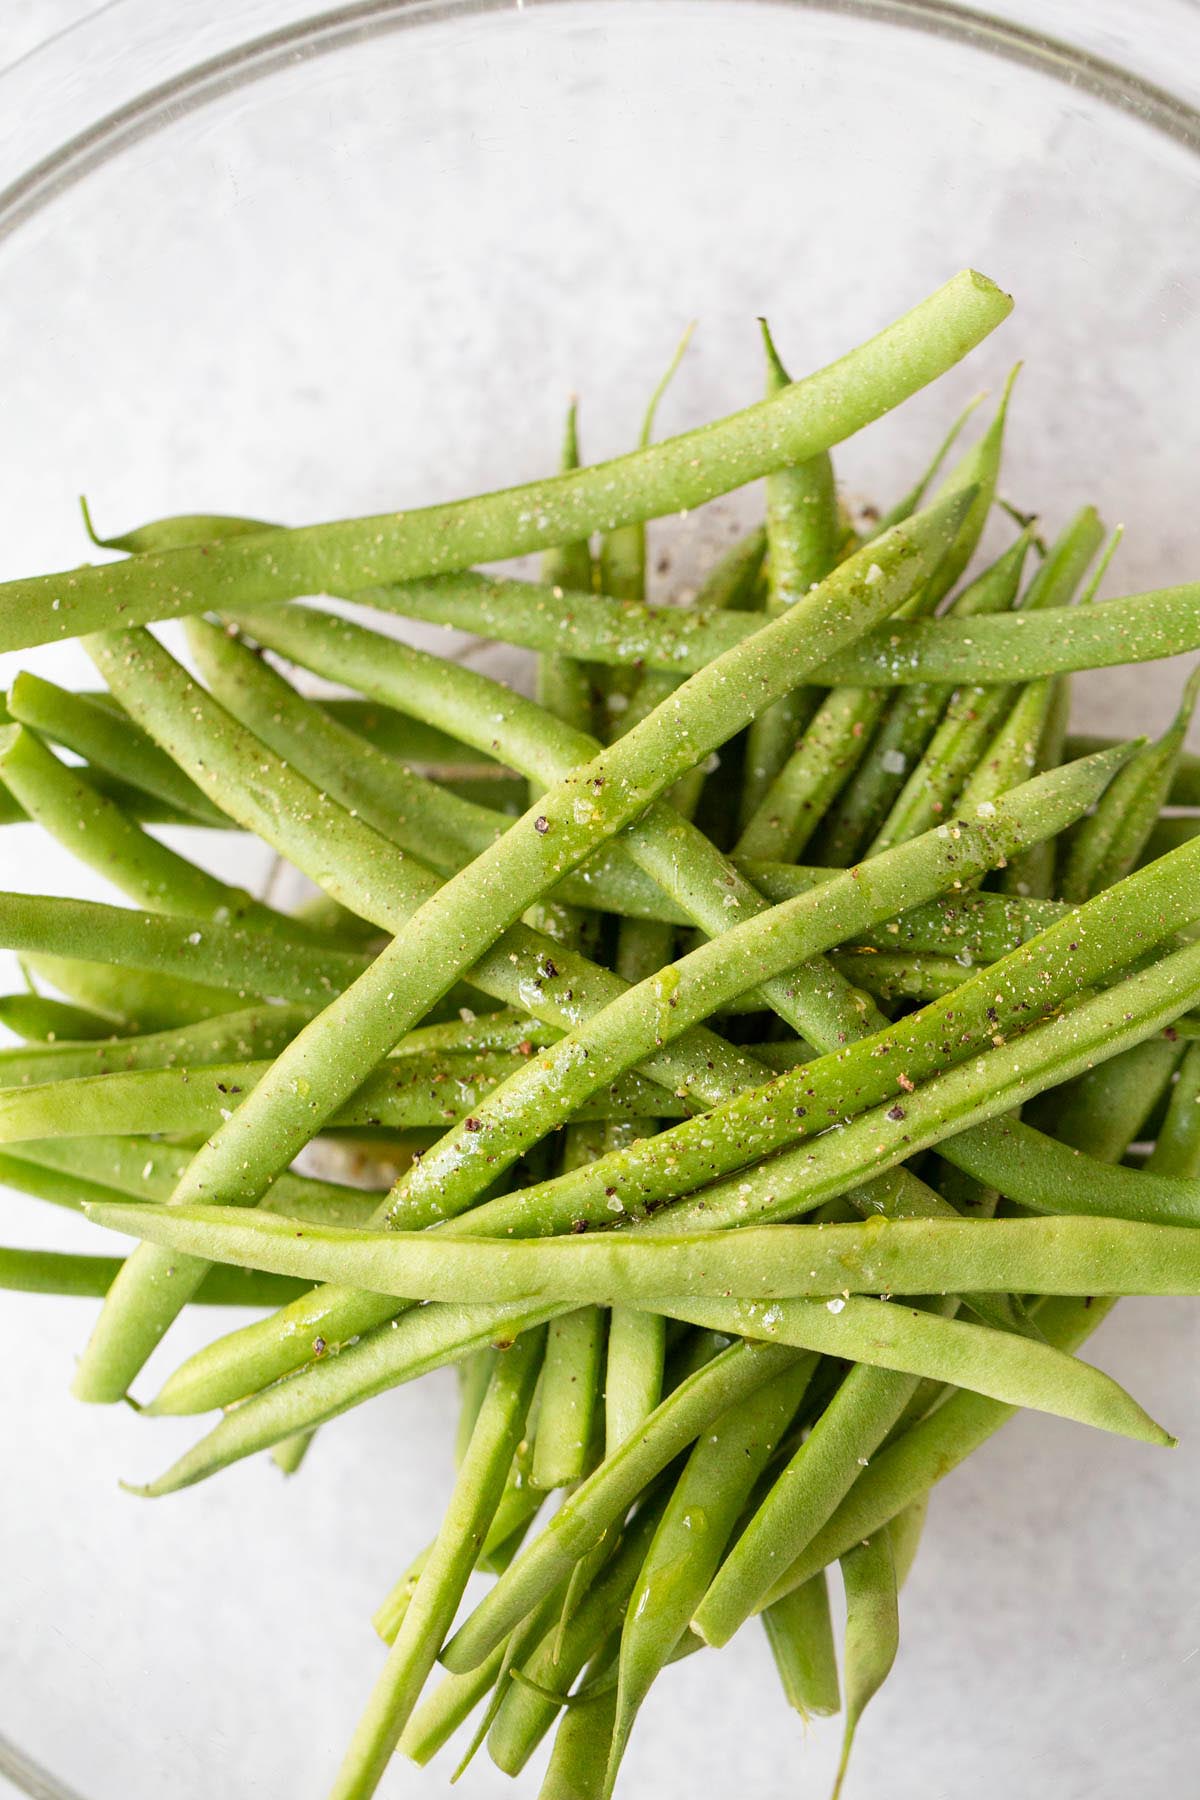 Green beans with seasonings in a bowl.